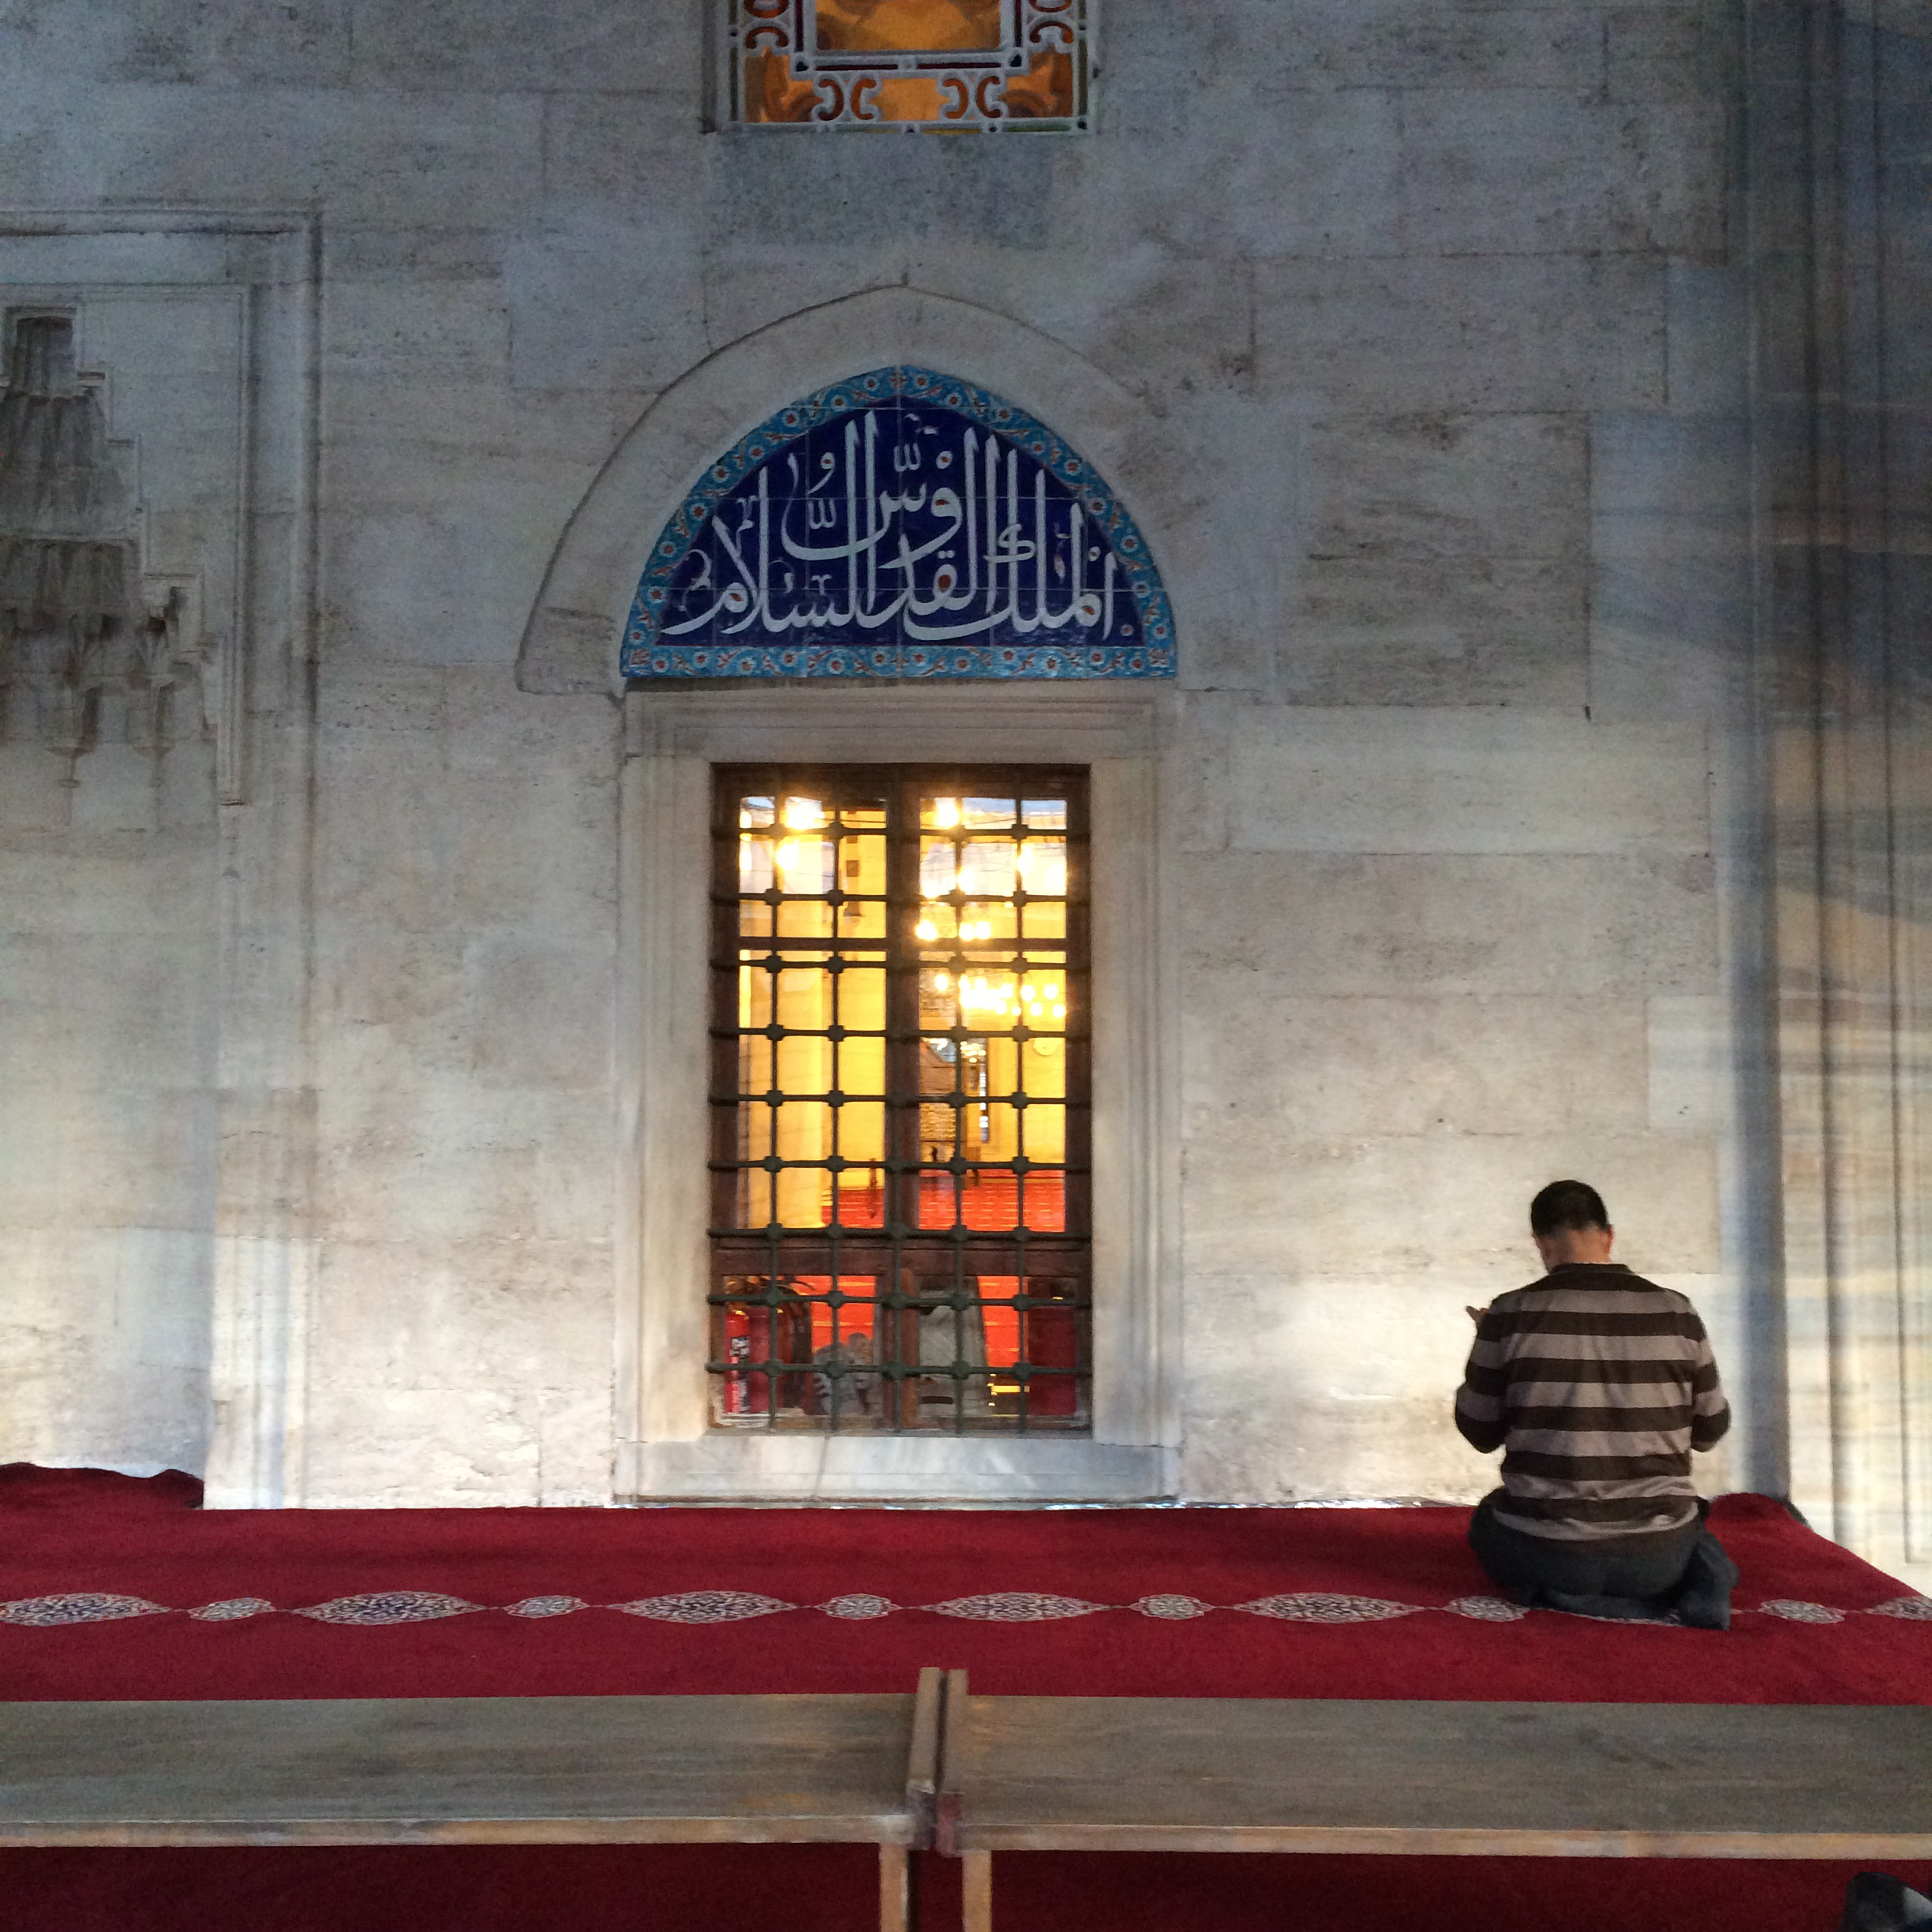 Kılıç Ali Paşa mosque was built for Süleyman the Magnificent in the 16th century. Image by Virginia Maxwell / Lonely Planet